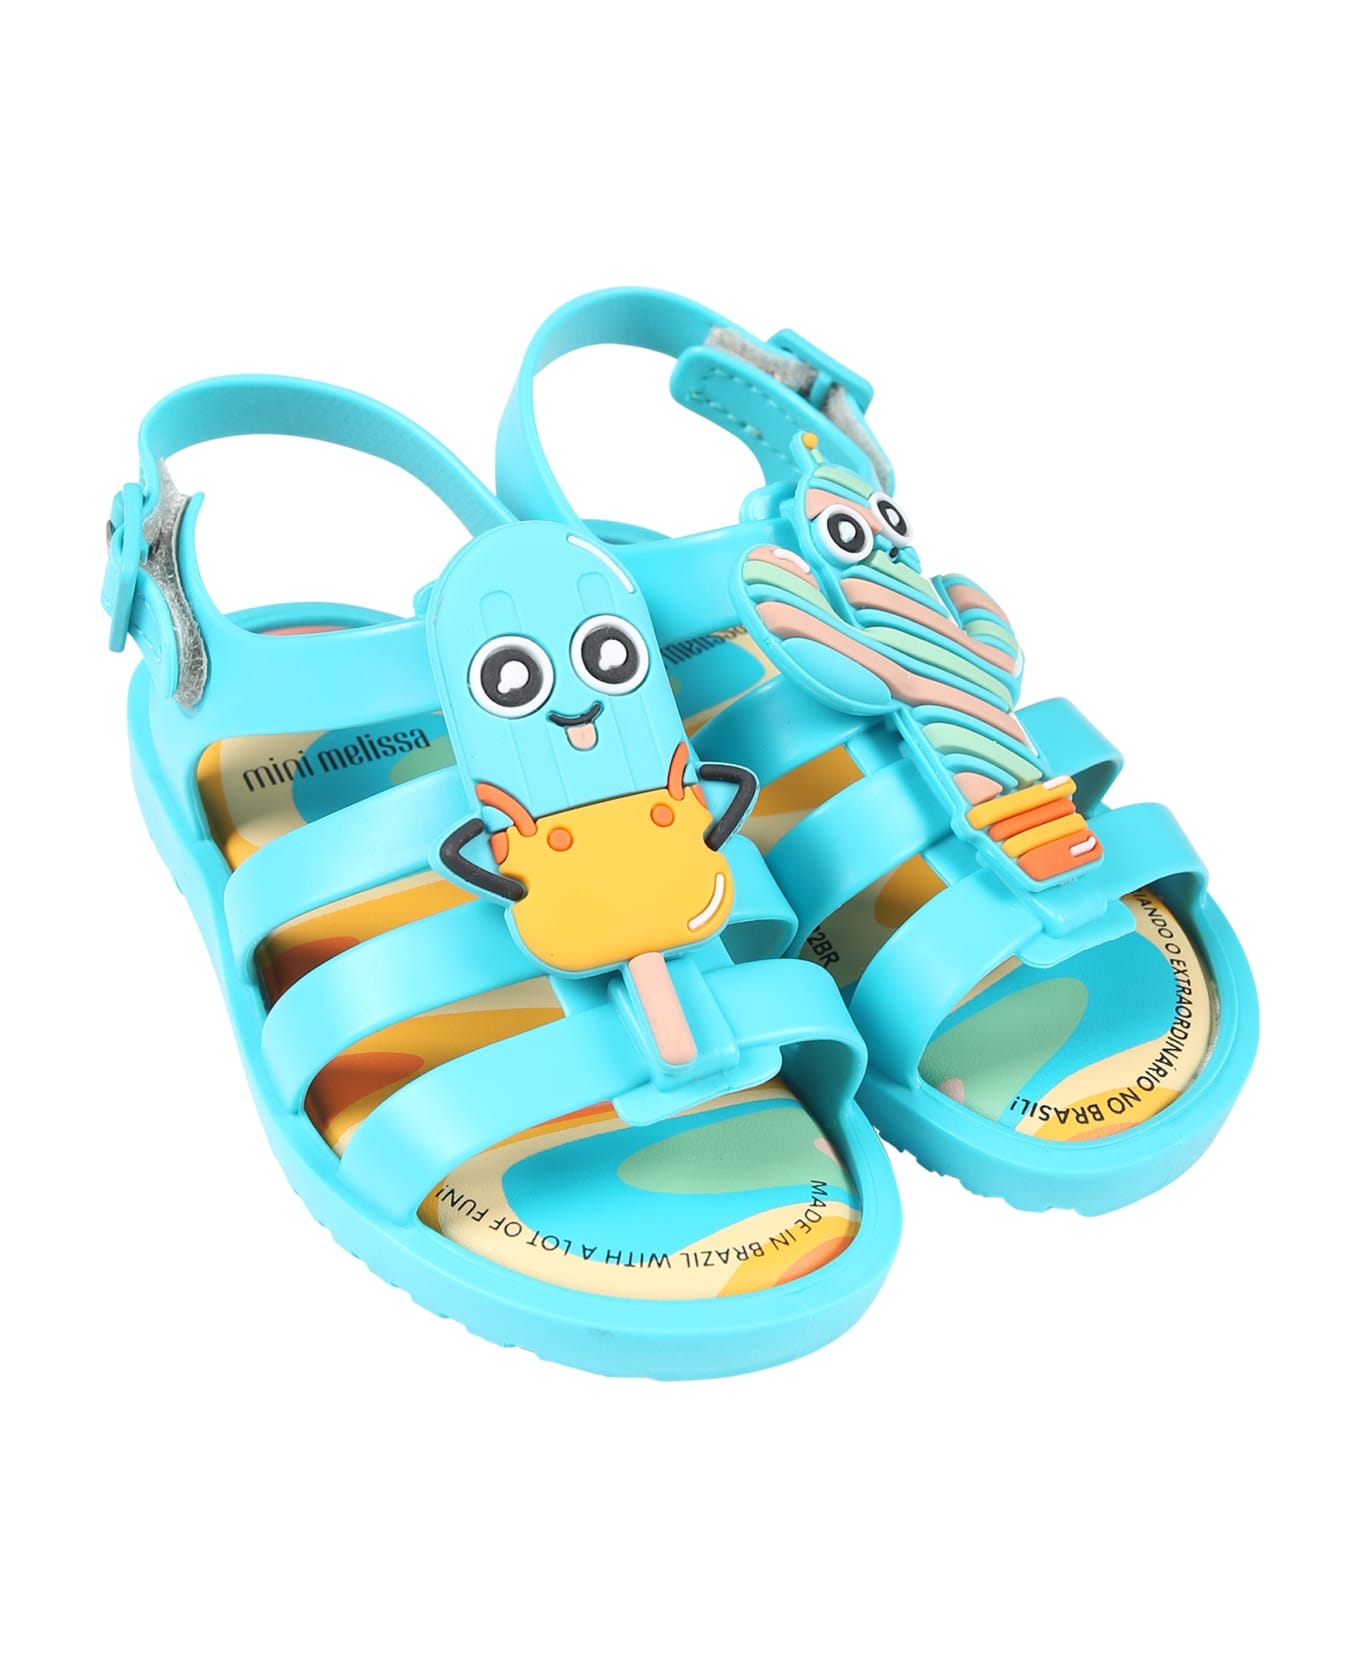 Melissa Light Blue Sandals For Kids With Cactus And Popsicle - Light Blue シューズ